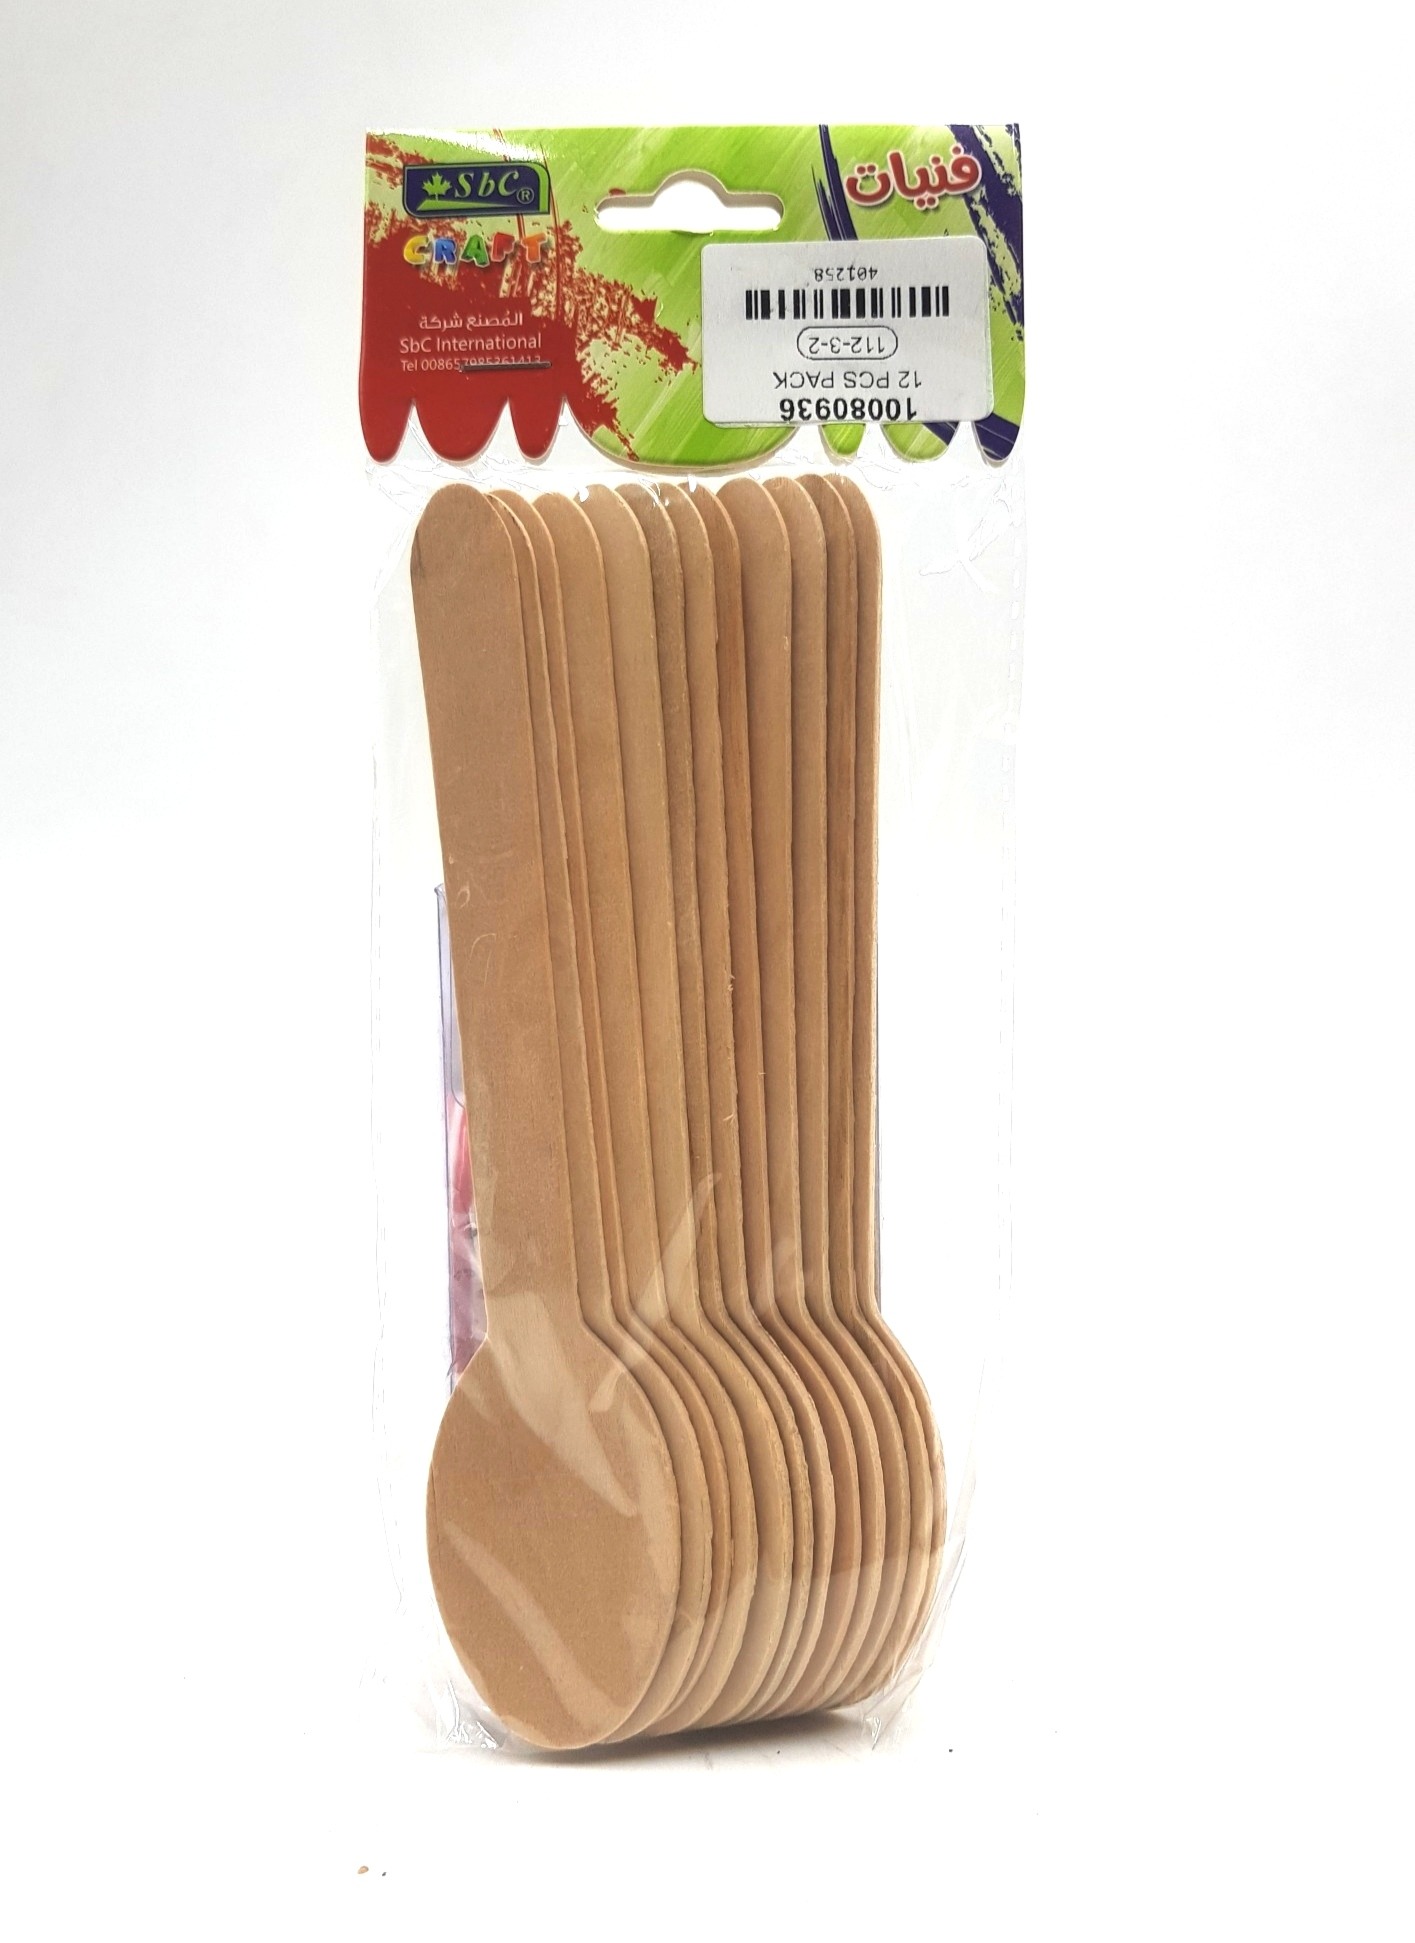 12 Pcs Pack wooden spoon